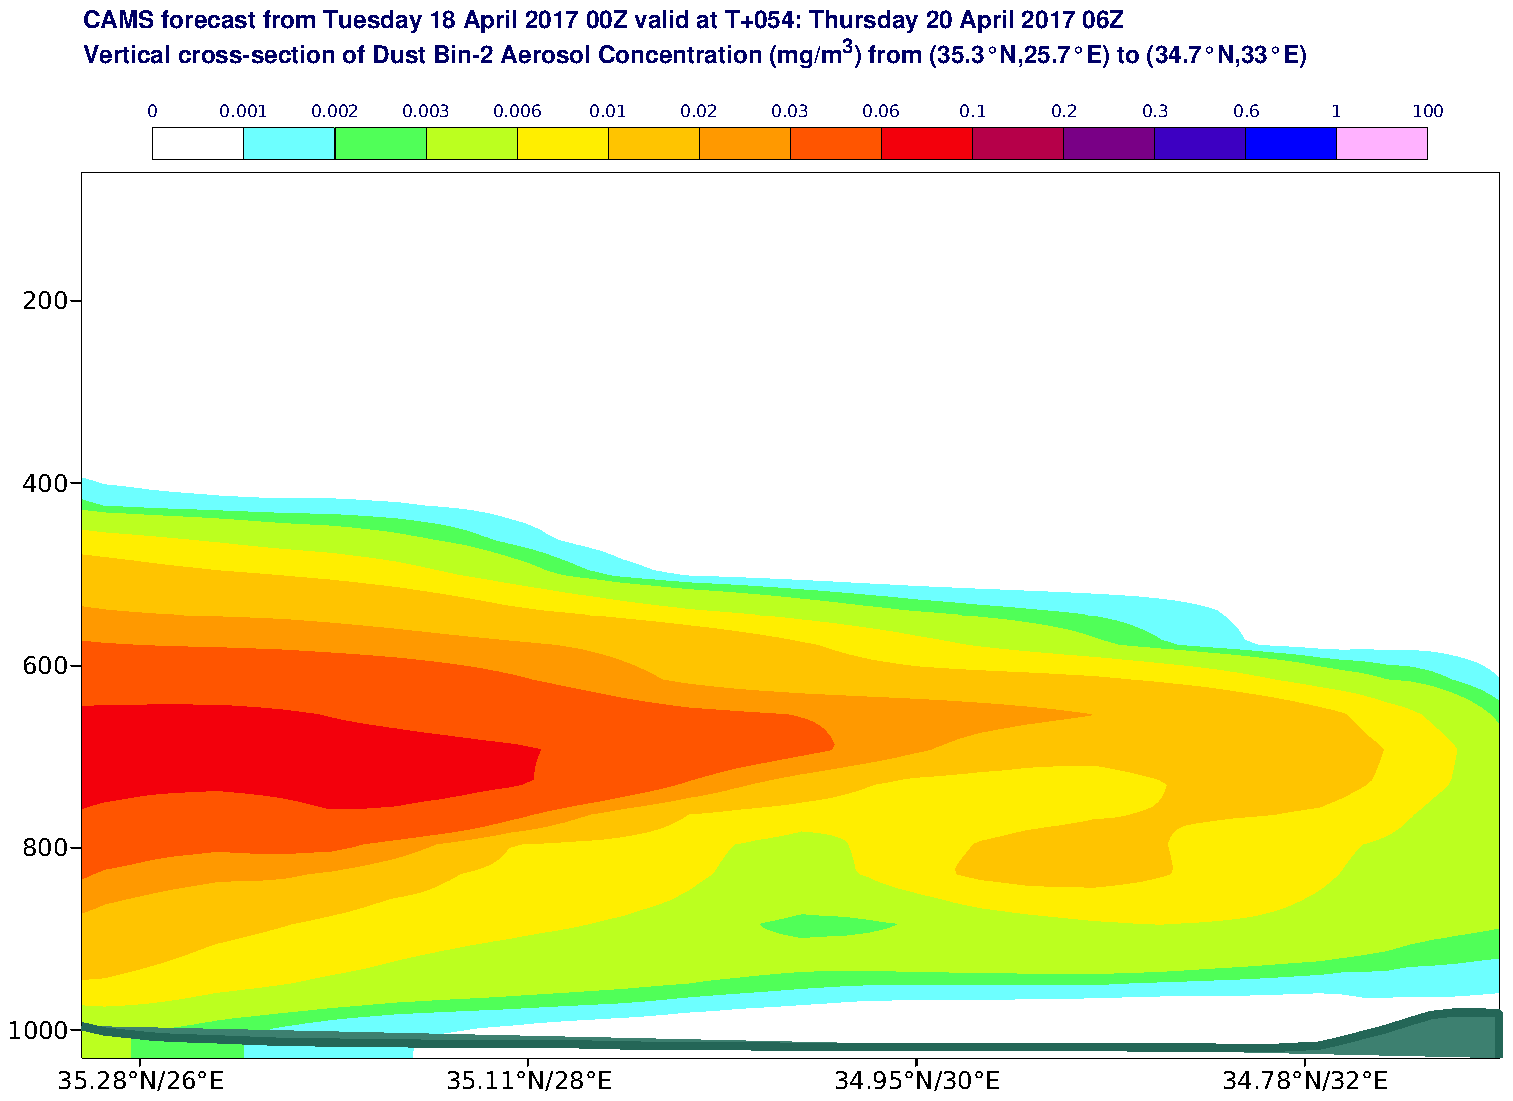 Vertical cross-section of Dust Bin-2 Aerosol Concentration (mg/m3) valid at T54 - 2017-04-20 06:00